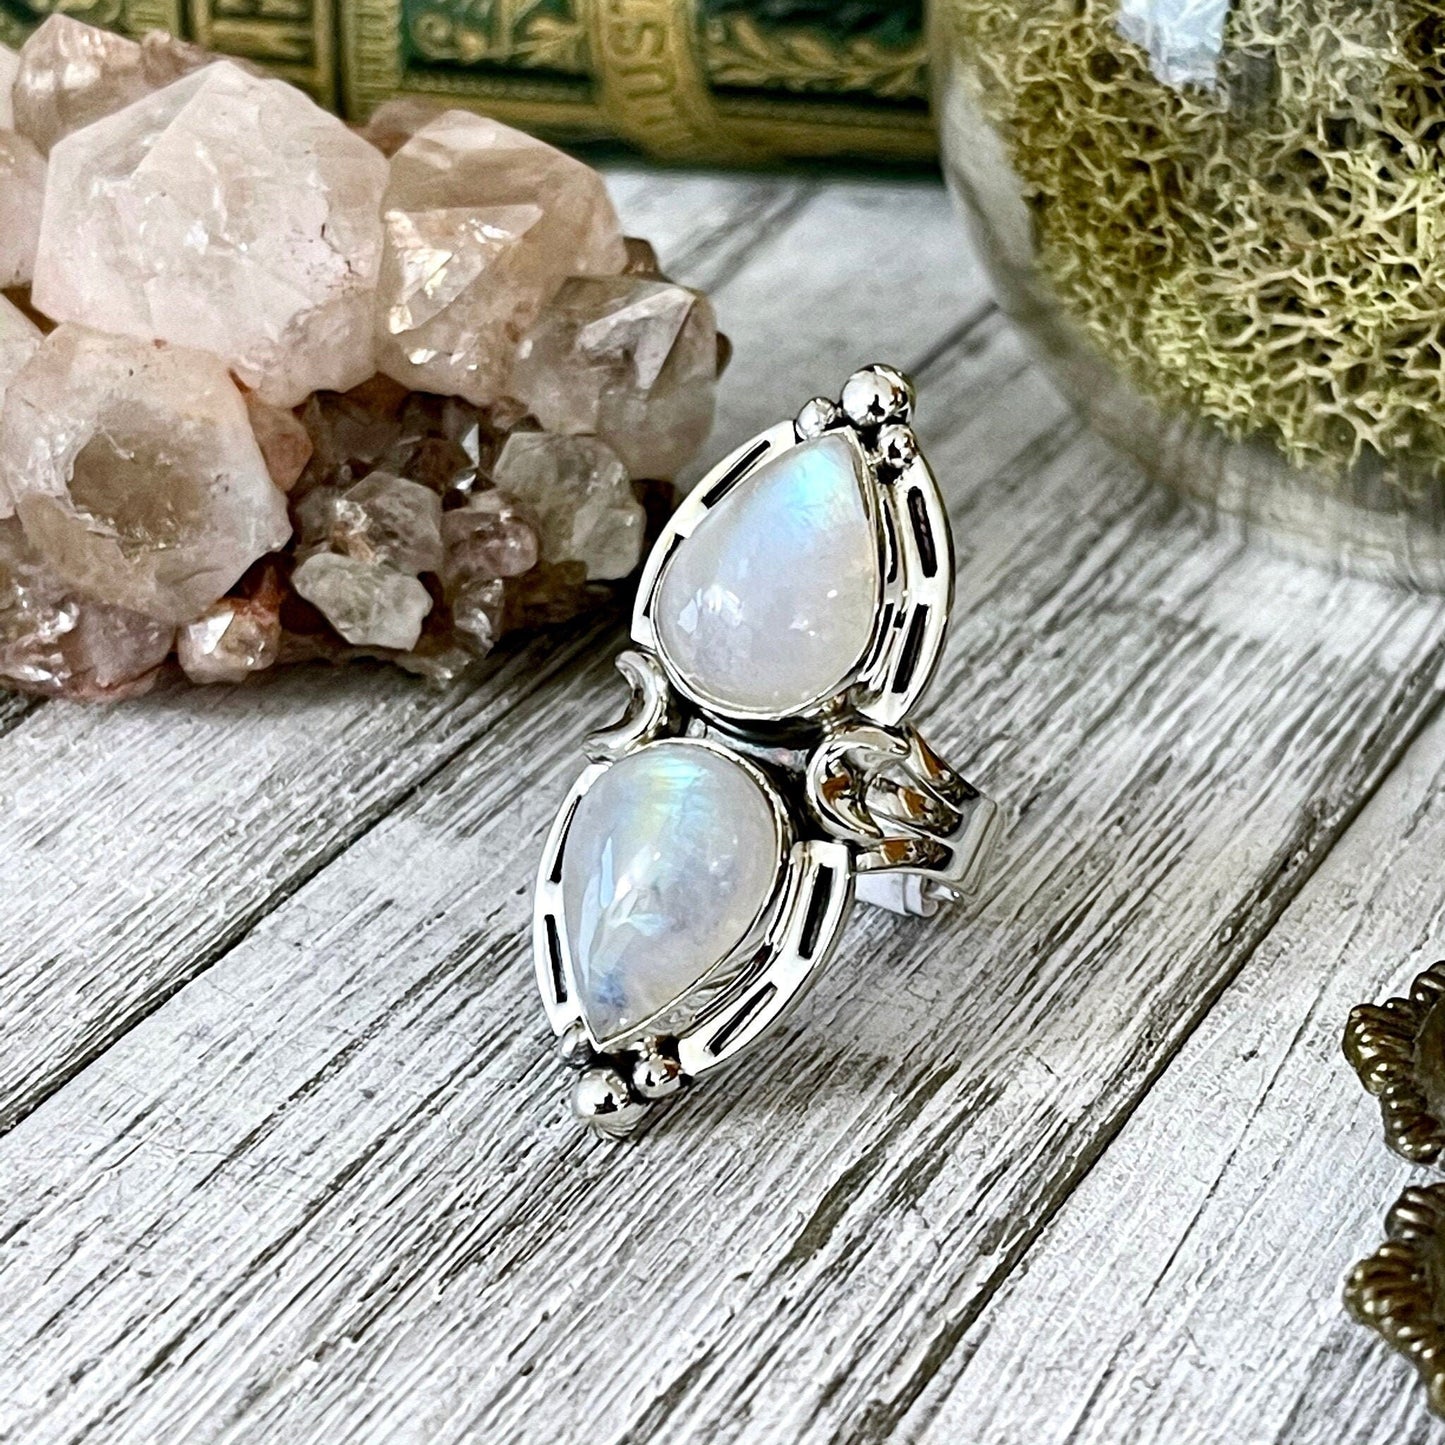 Mystic Moons Rainbow Moonstone Crystal Ring in Solid Sterling Silver- Designed by FOXLARK Collection Size 5 6 7 8 9 10 11